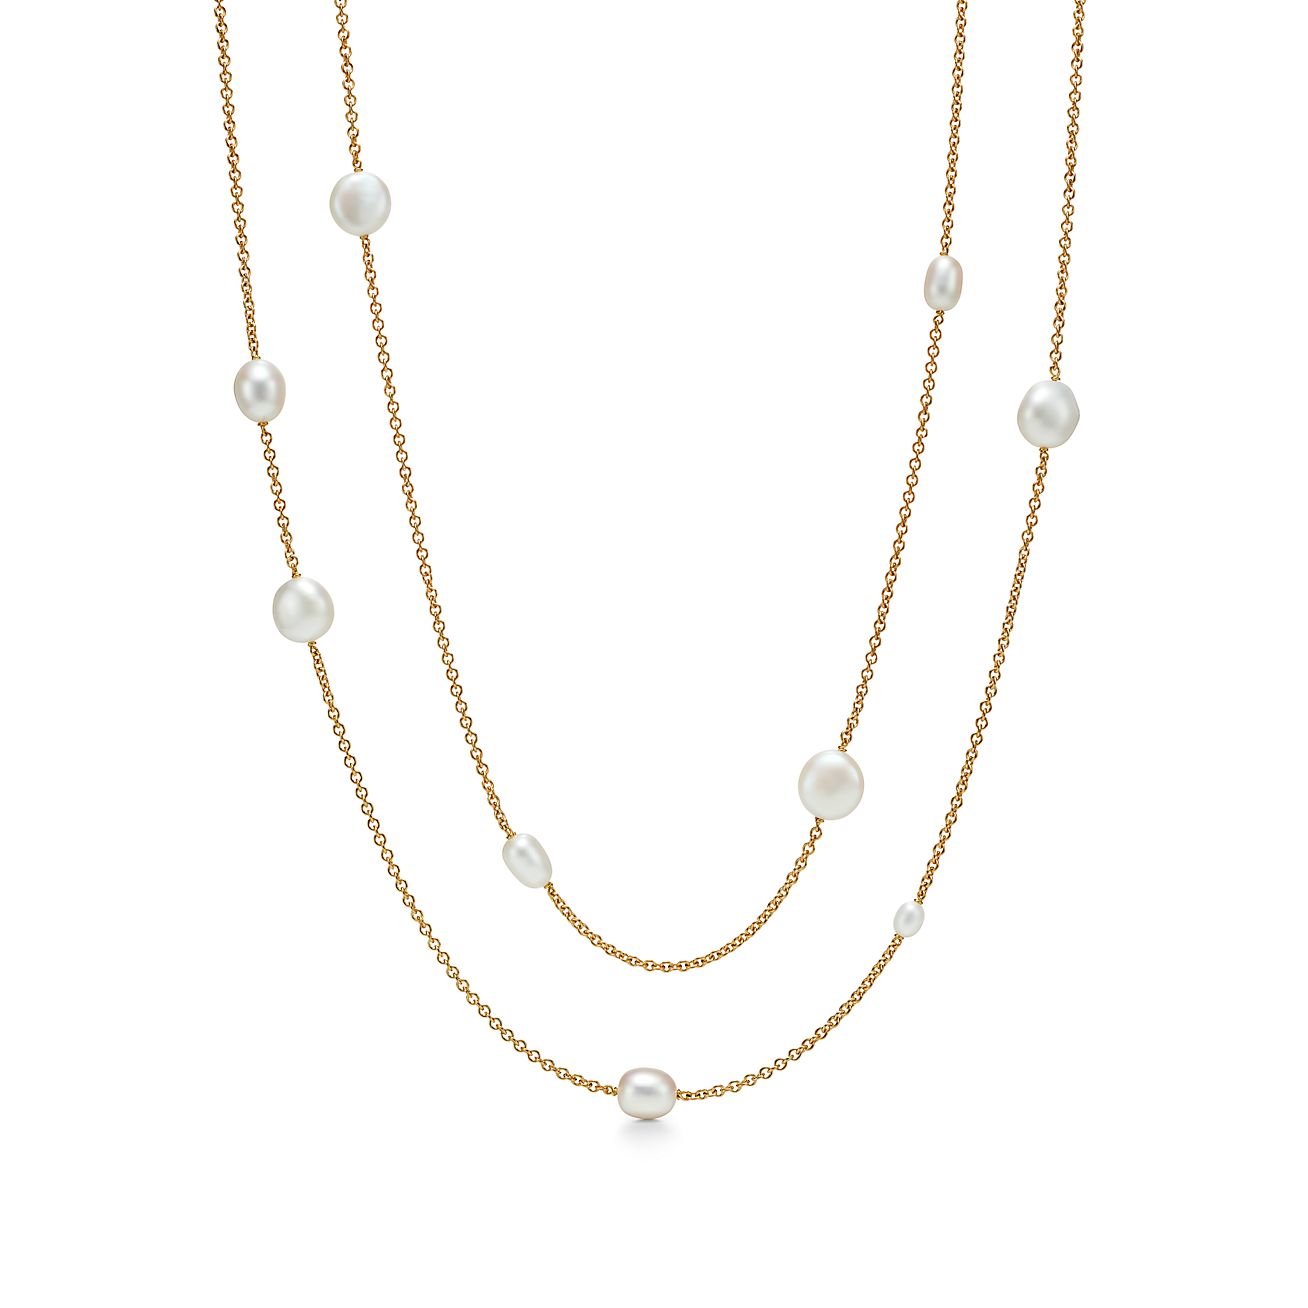 Elsa Peretti Pearls by The Yard Sprinkle Necklace in 18K Gold, Size: 36 in.